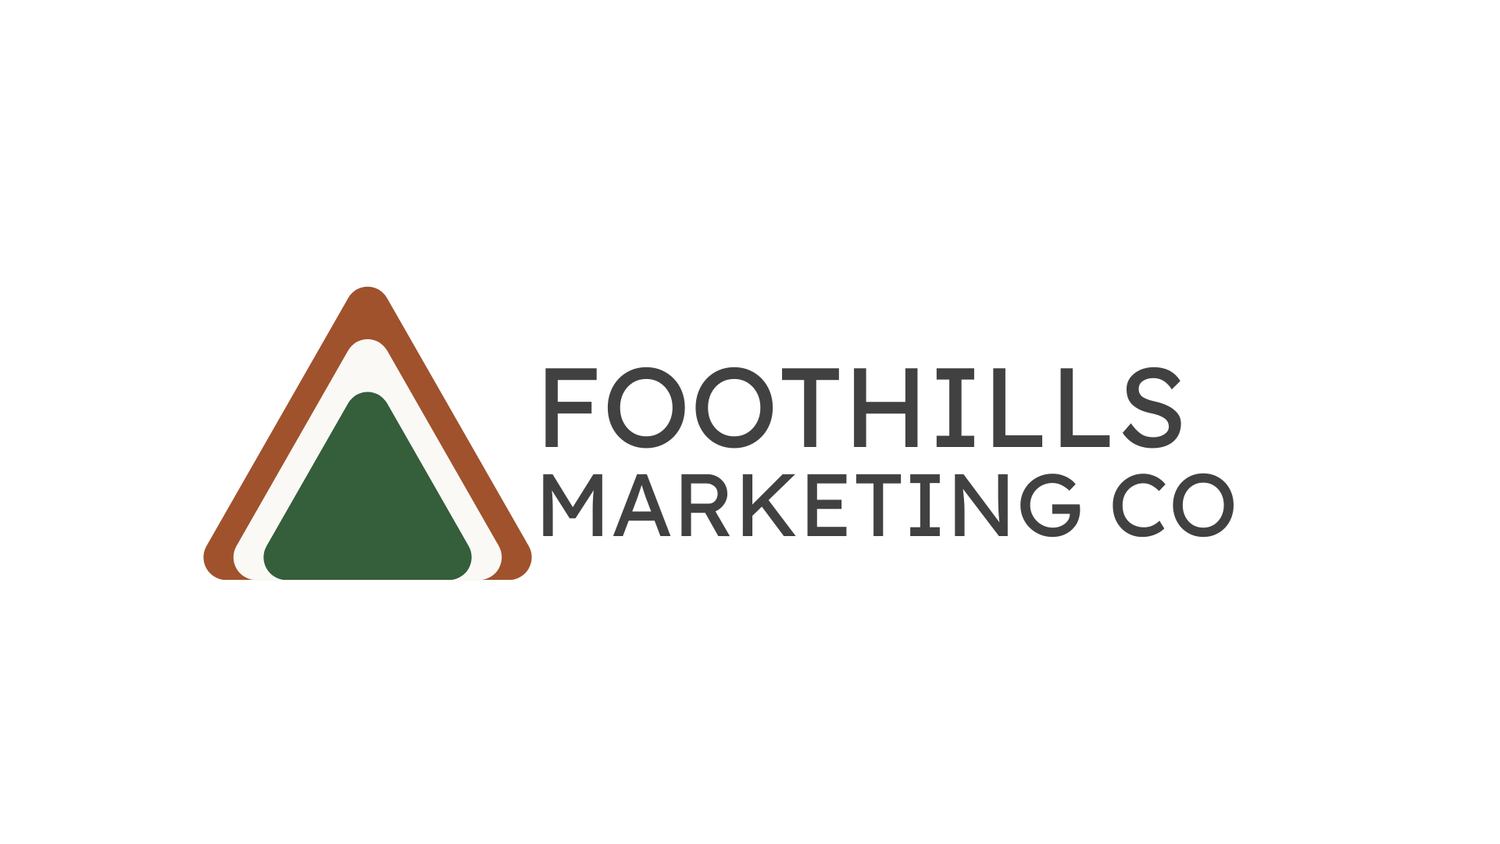 Foothills Marketing Co